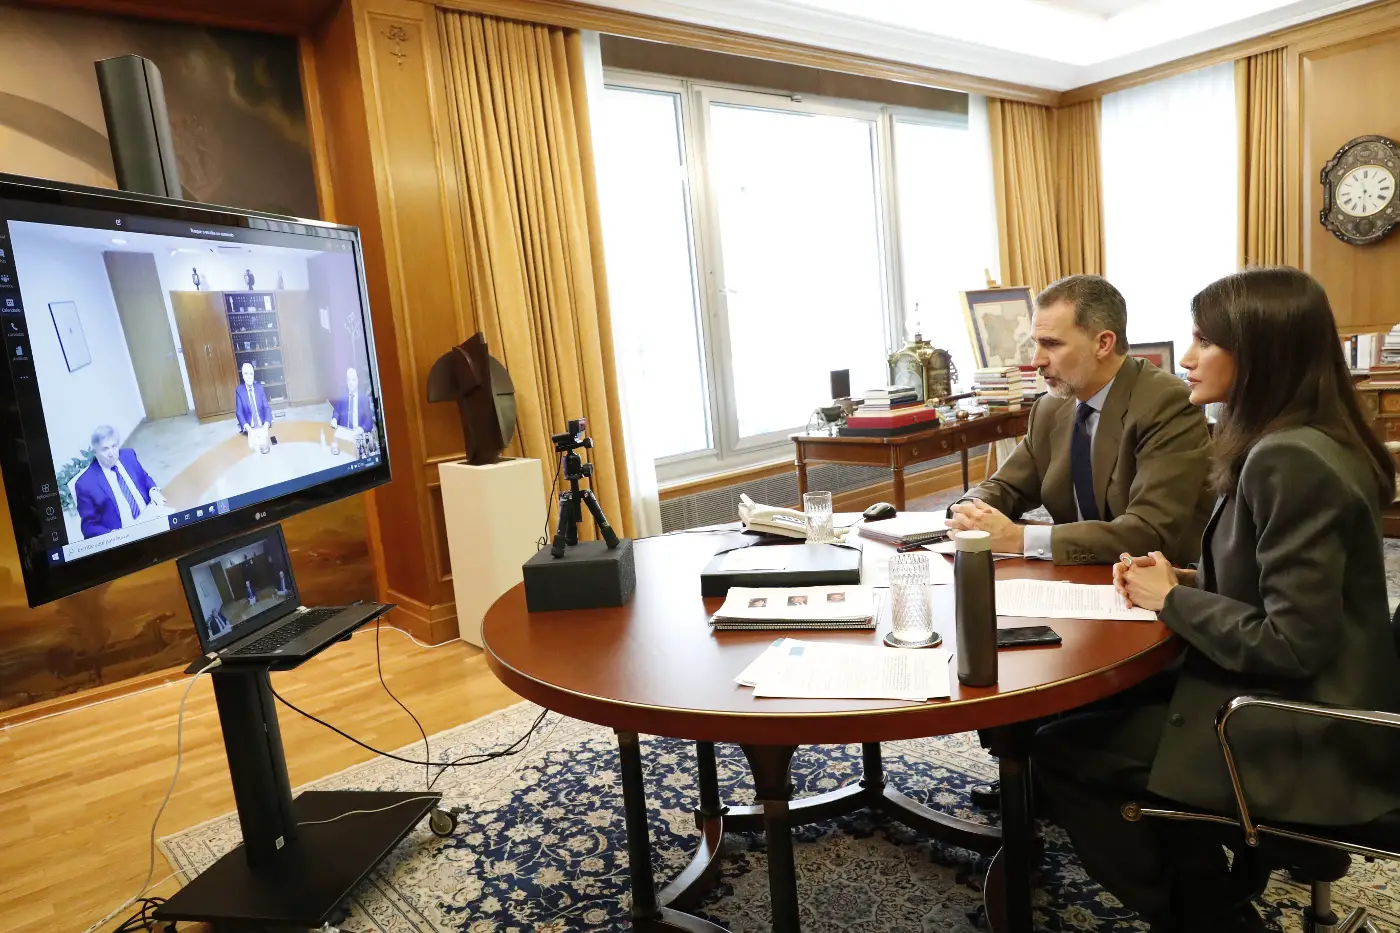 Queen Letizia and King Felipe held a dialogue with the top managers of RENFE through a videoconference